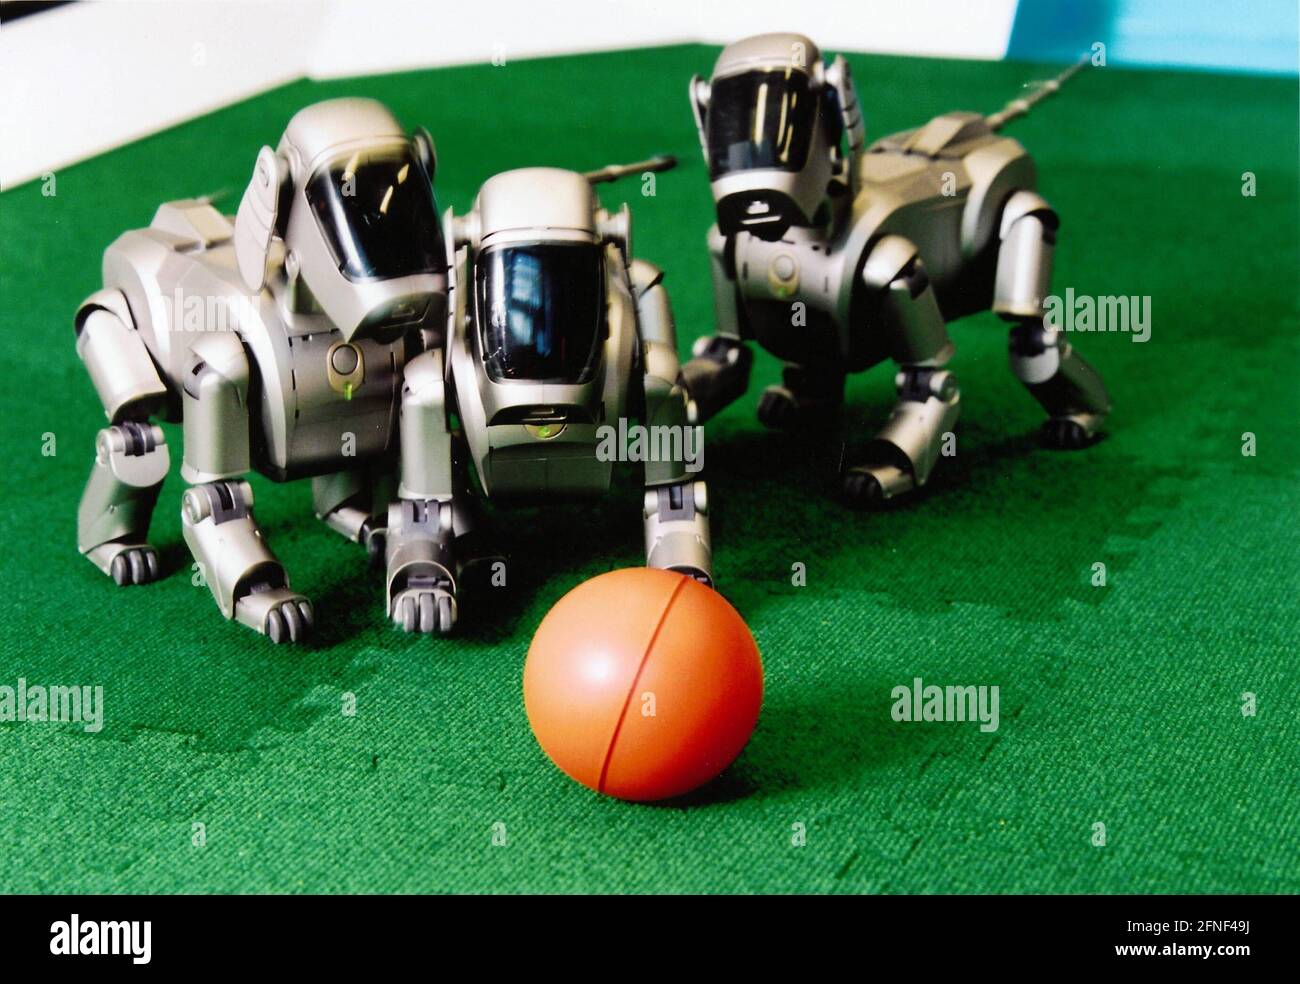 Computer science students at Humboldt-Universität zu Berlin are working on soccer-playing robot dogs from SONY in Berlin-Adlershof. The project leader is Professor Peter Burkhard. The unit price of the original Kicker model, which is only sold in Japan and the USA, is DM 4,000. [automated translation] Stock Photo